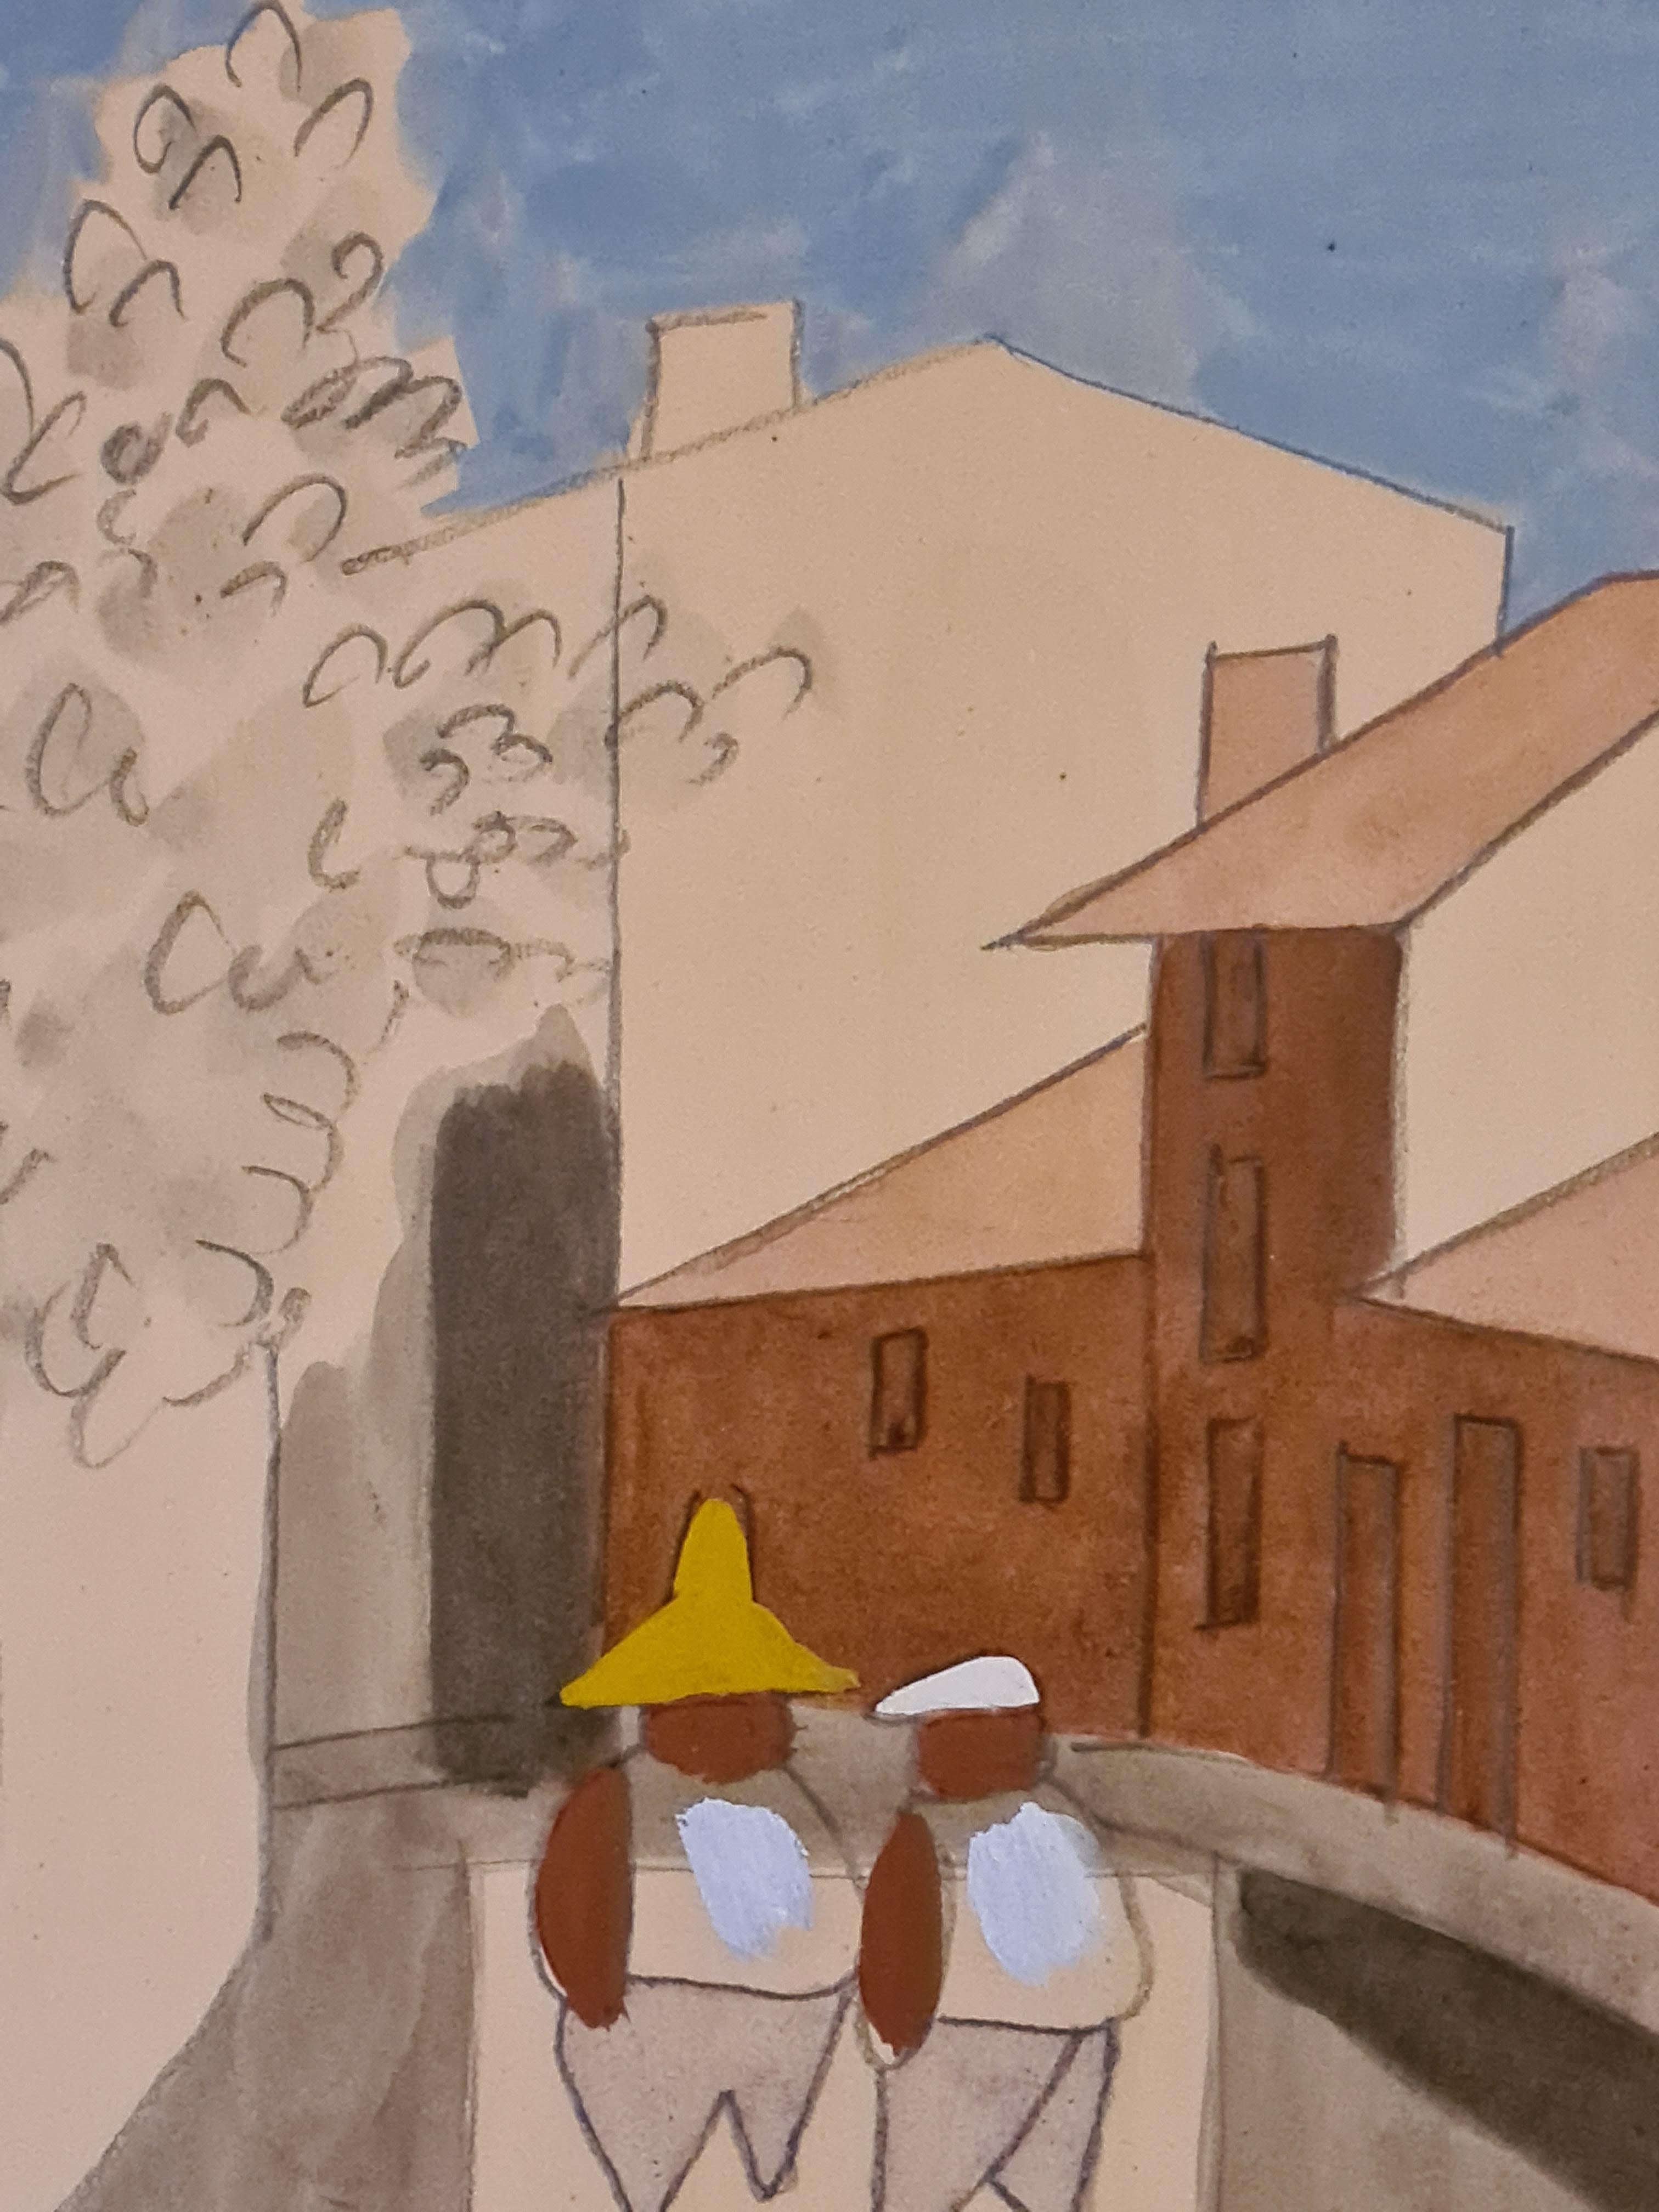 Original, unique French goauche of a street scene by noted French Art Deco illustrator Raymond de Lavererie. Signed bottom right, presented under glass in wood and gilt frame.

A charming rendition of two people, in unusual hats, having a